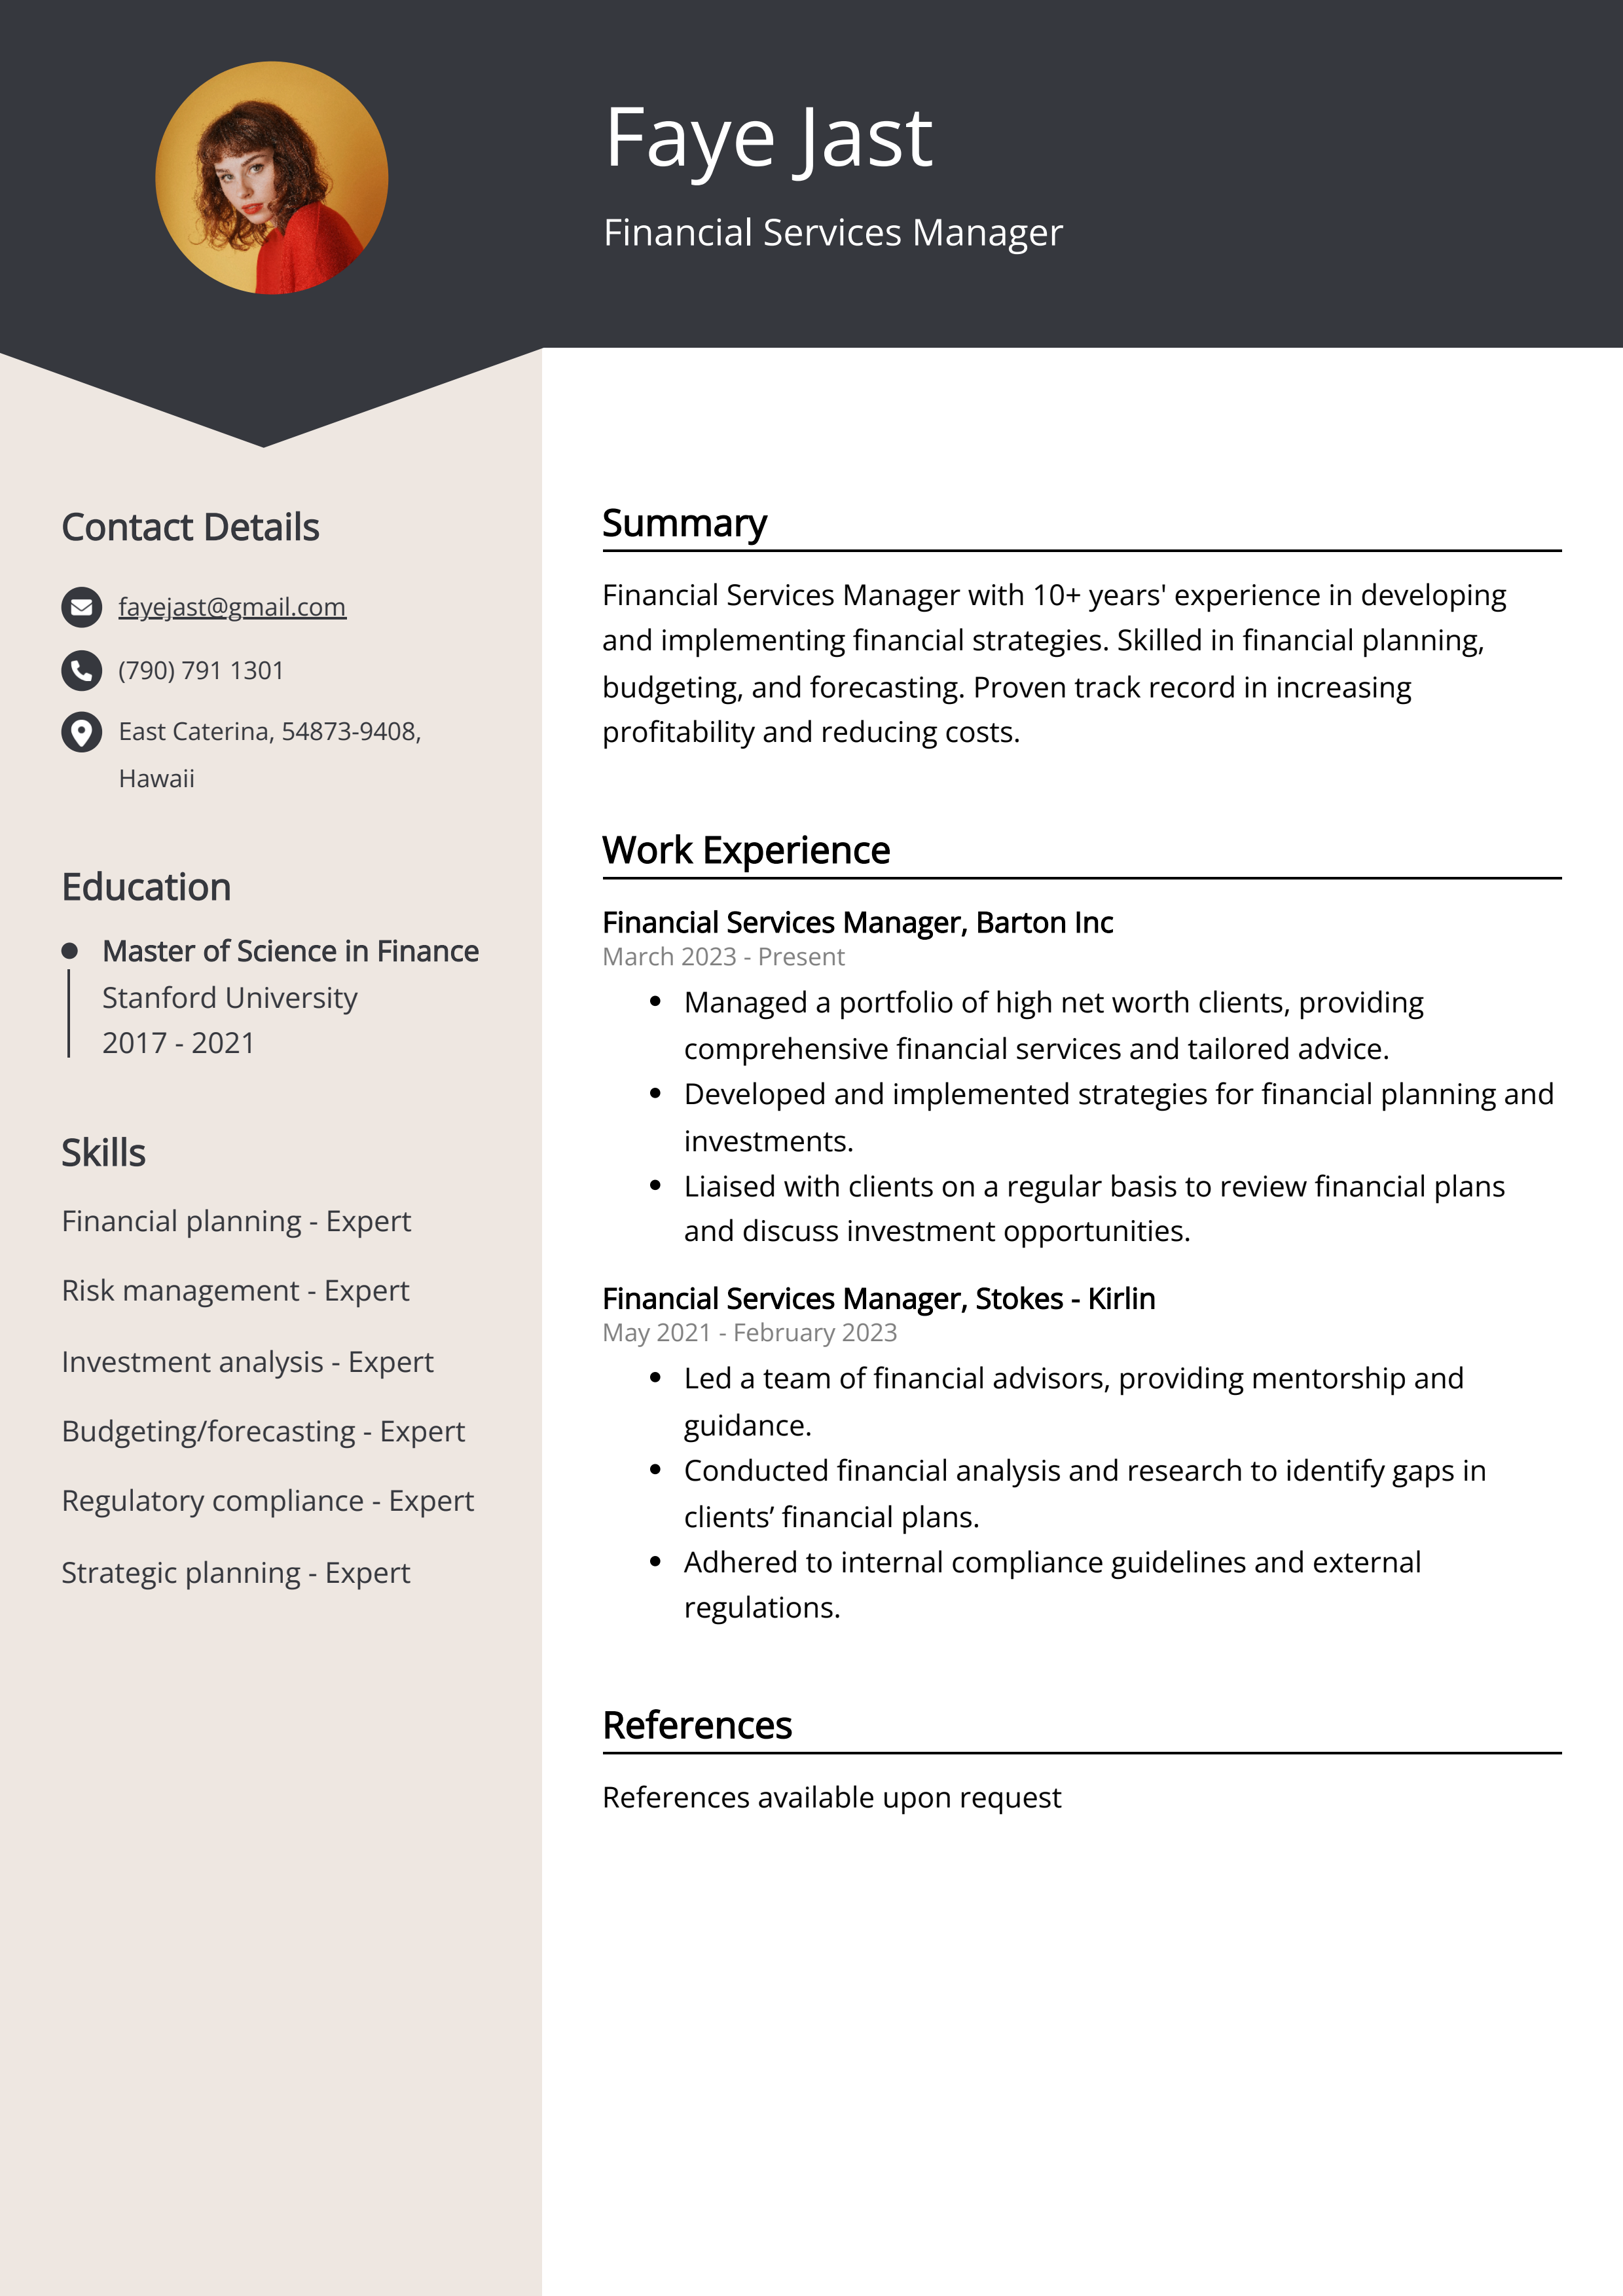 Financial Services Manager CV Example